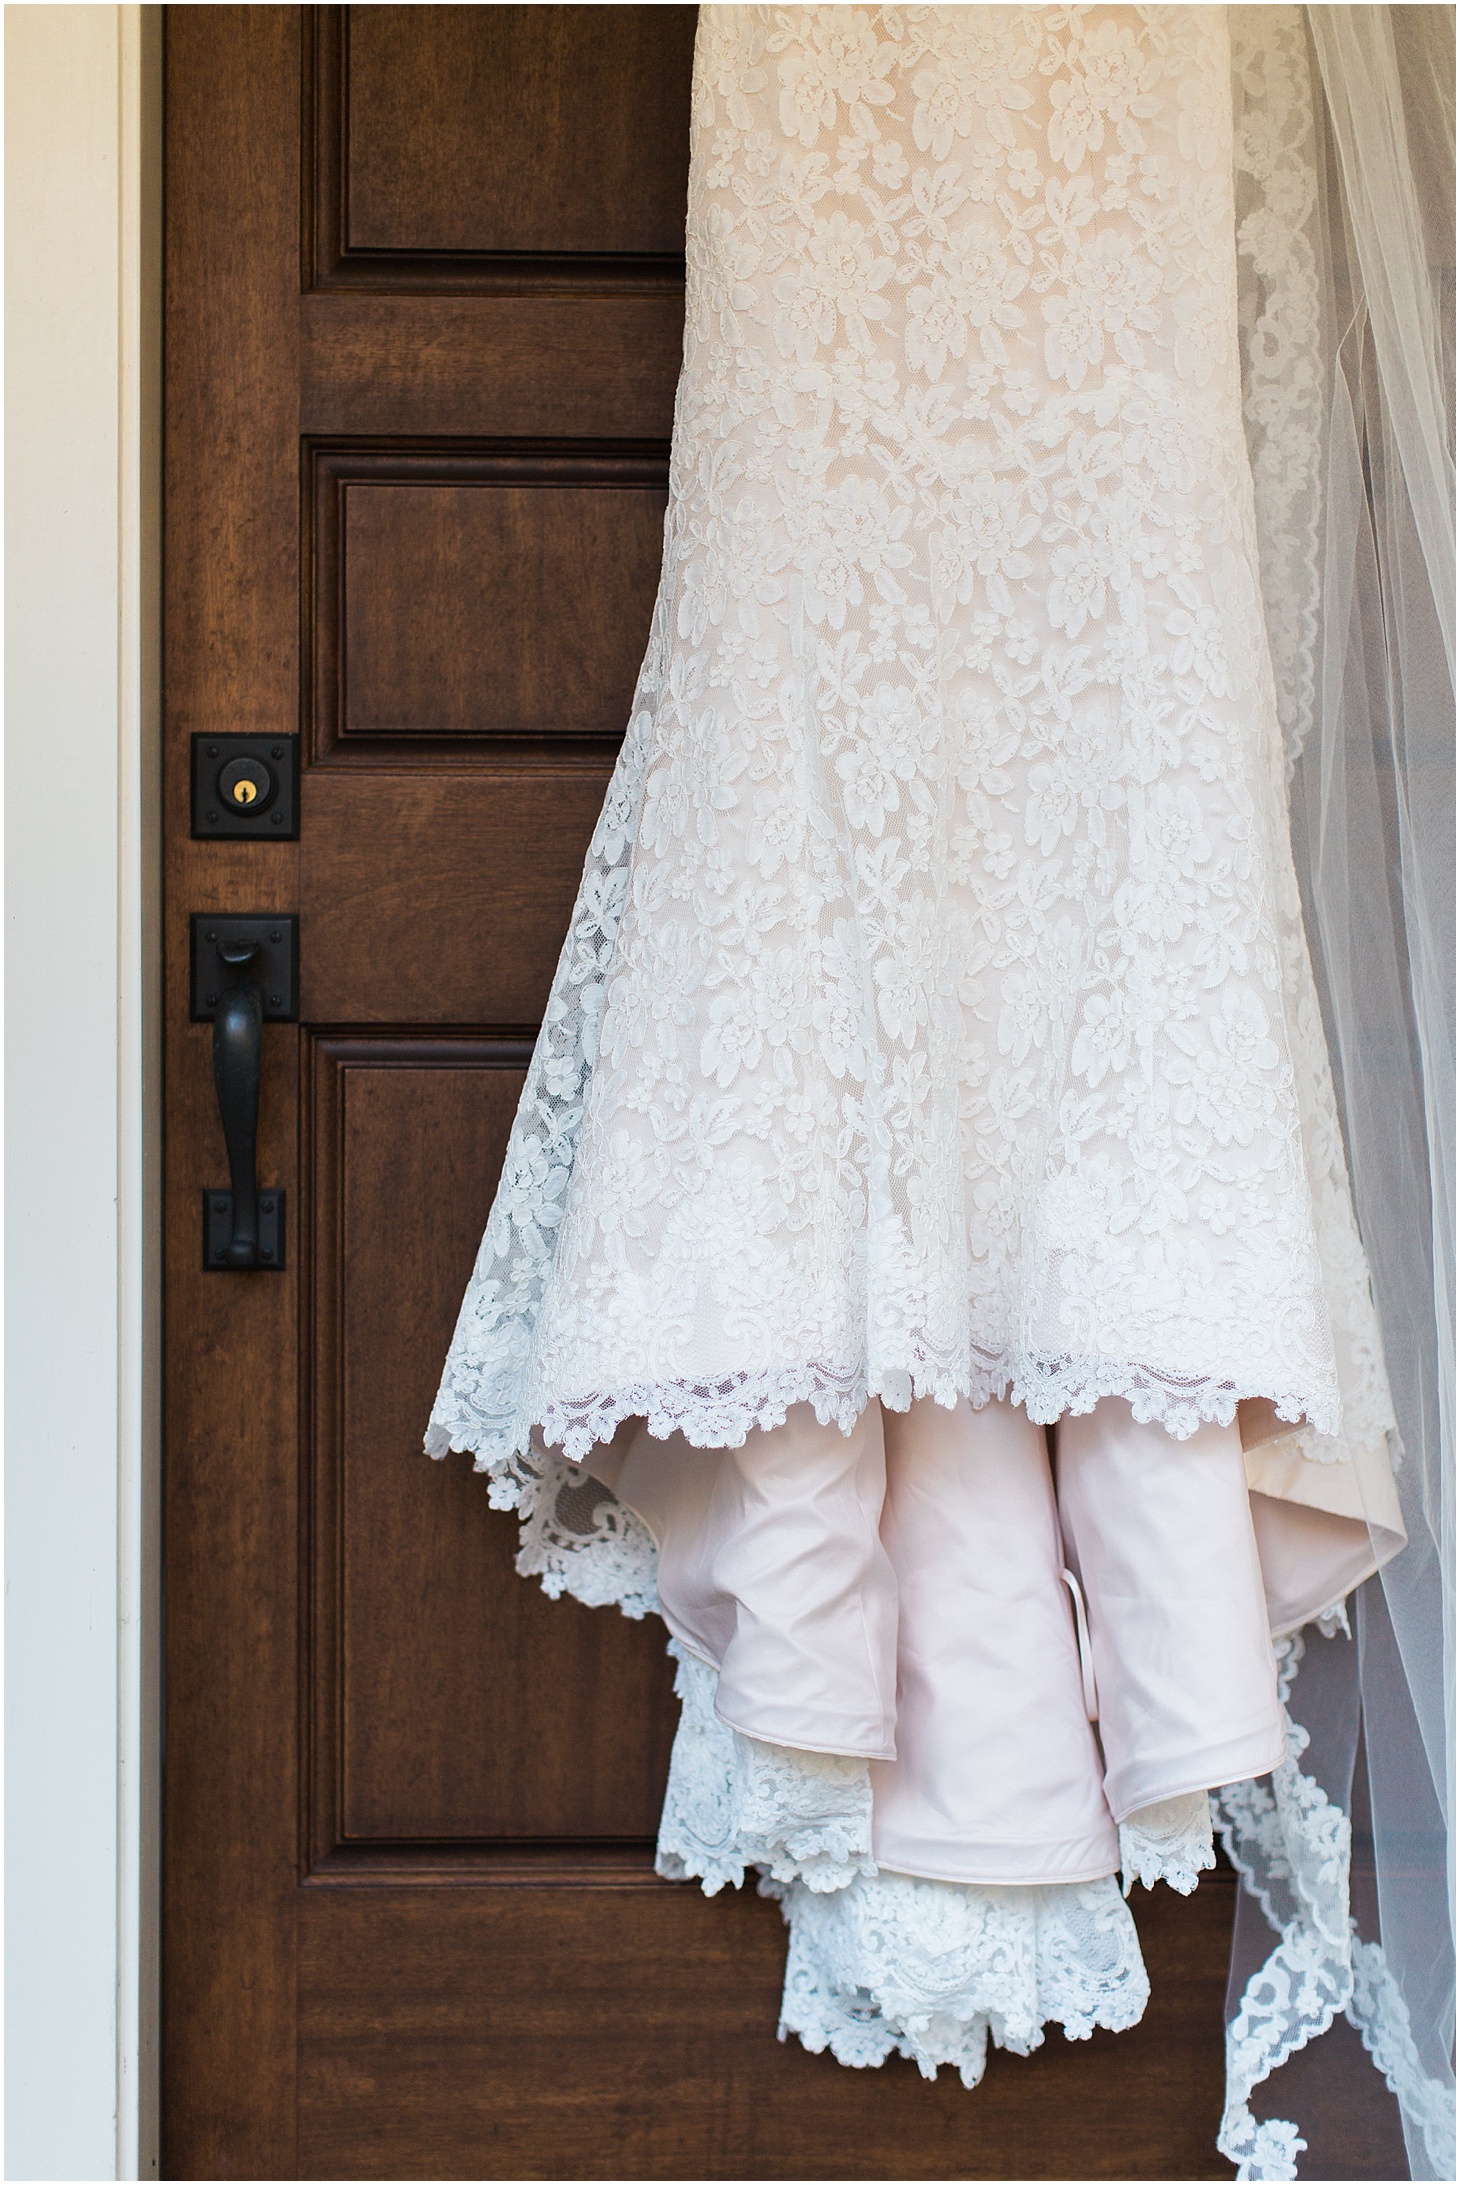 Romona Keveza Wedding Gown Detail | Wedding Ceremony at Old Presbyterian Meeting House | Southern Black Tie wedding at St. Regis DC in Dusty Blue and Ivory | Sarah Bradshaw Photography